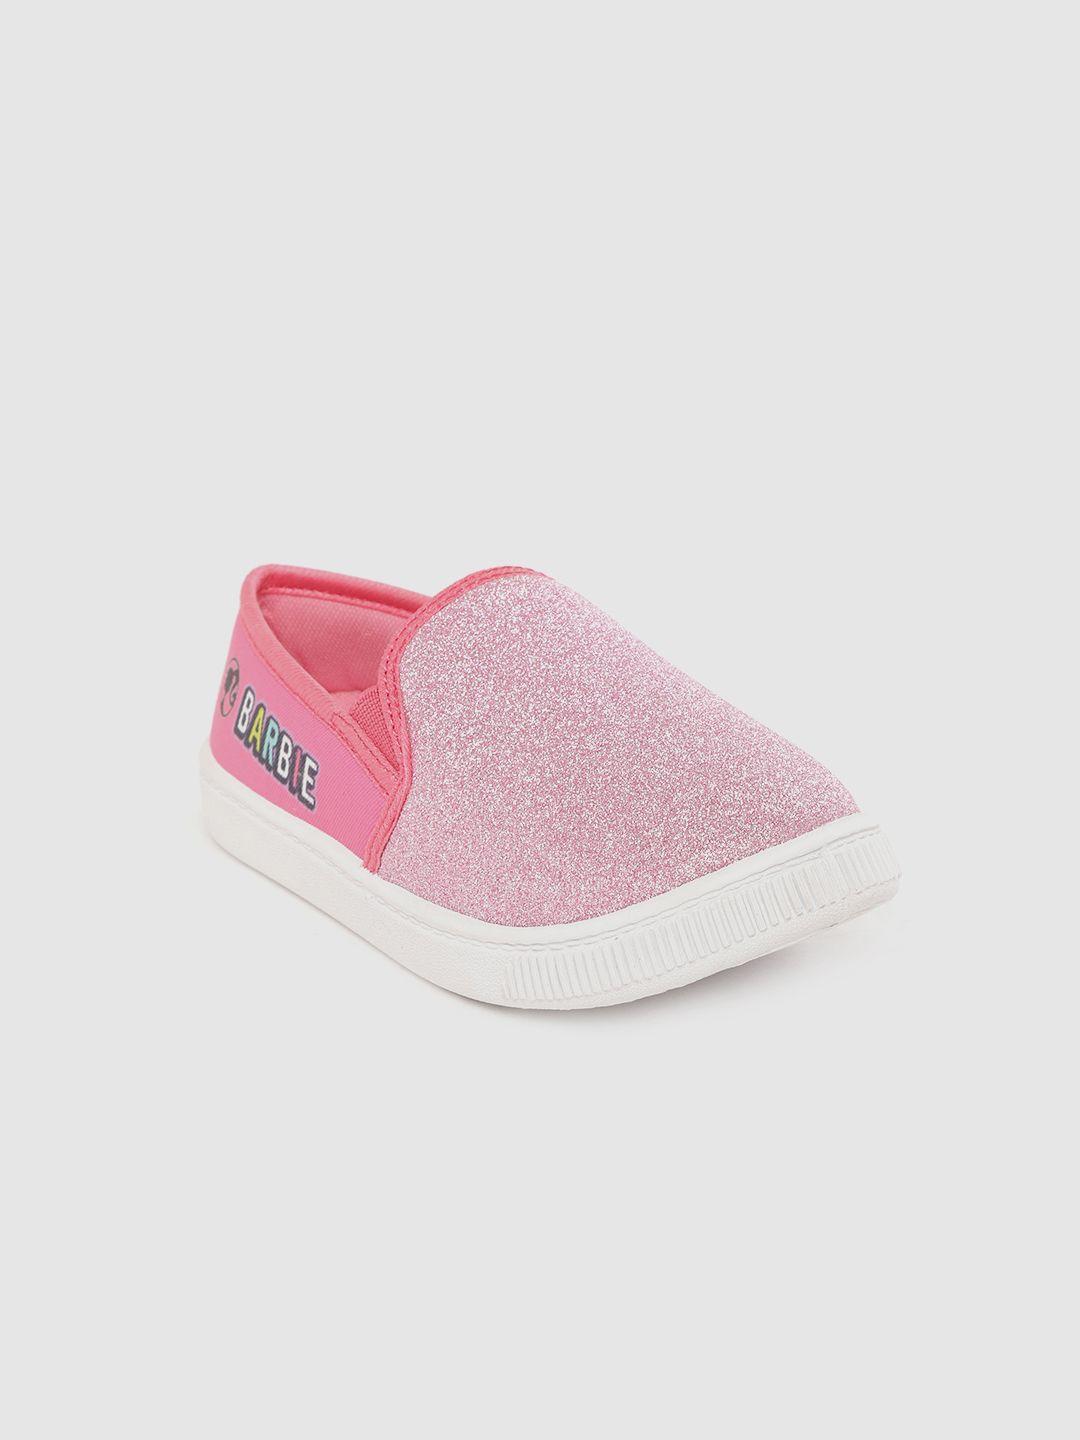 toothless by toothless girls barbie pink glitter slip-on sneakers with printed detail